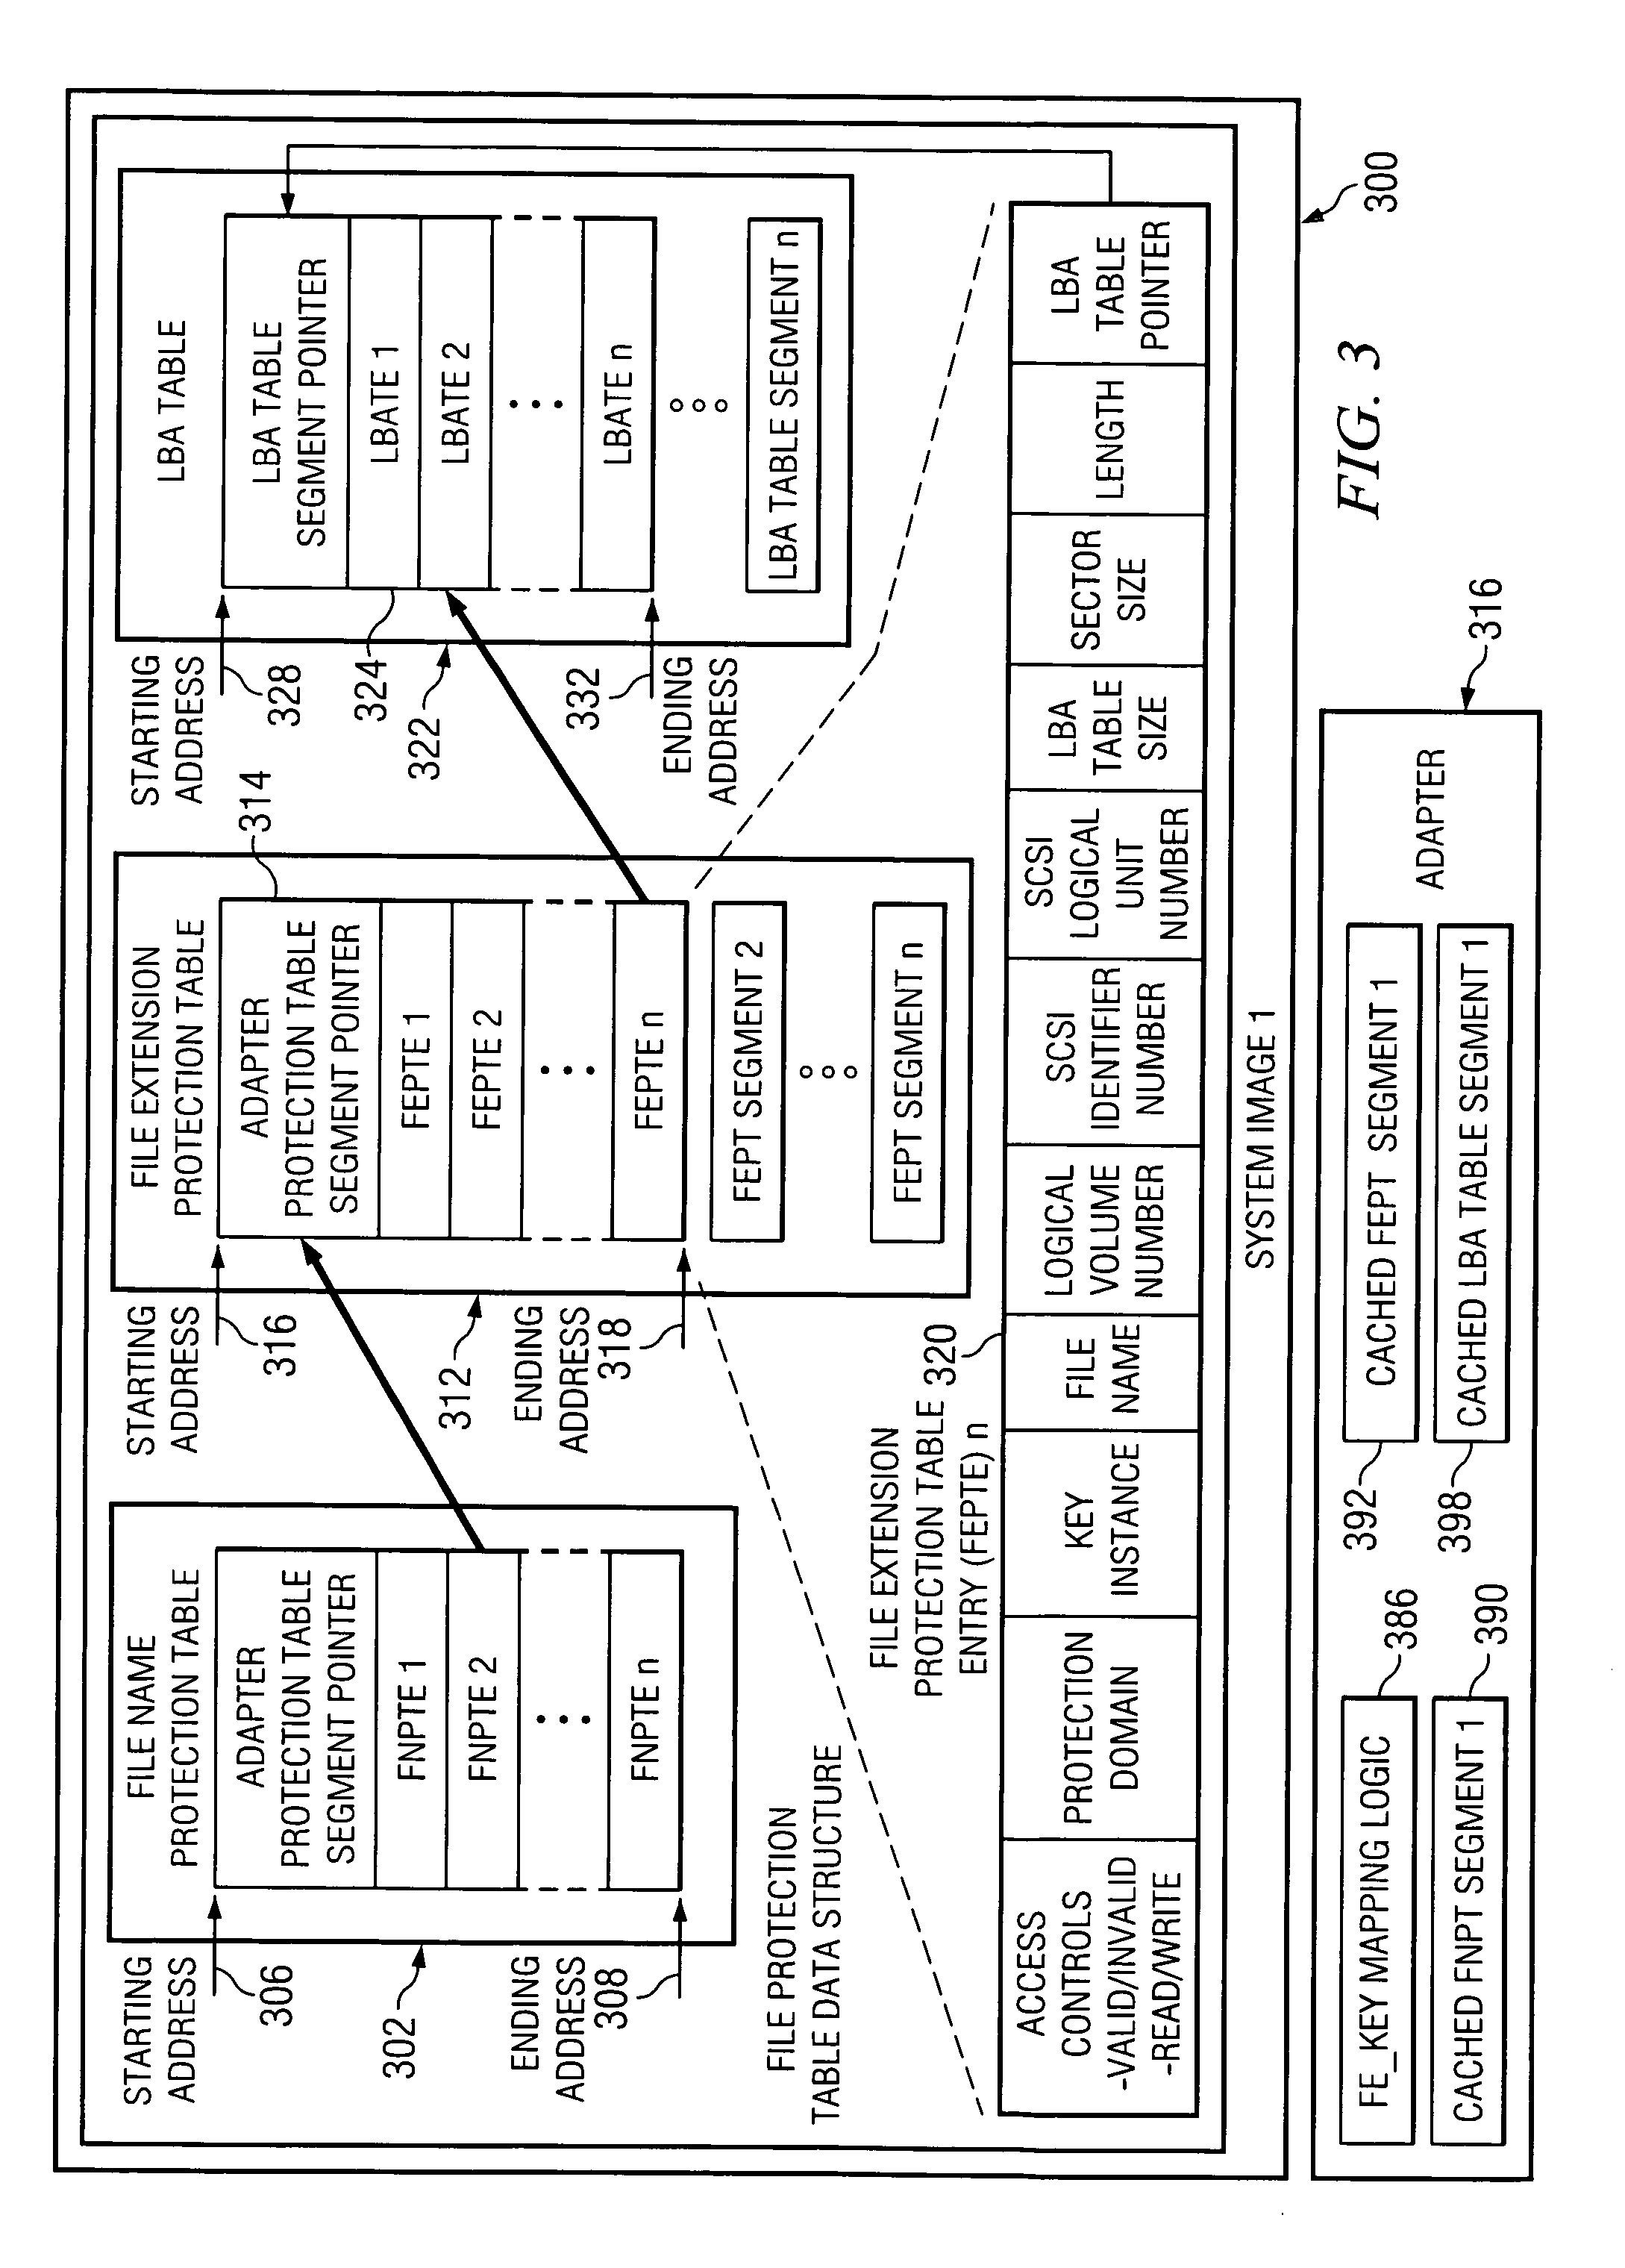 System and method for processing user space operations directly between an application instance and an I/O adapter